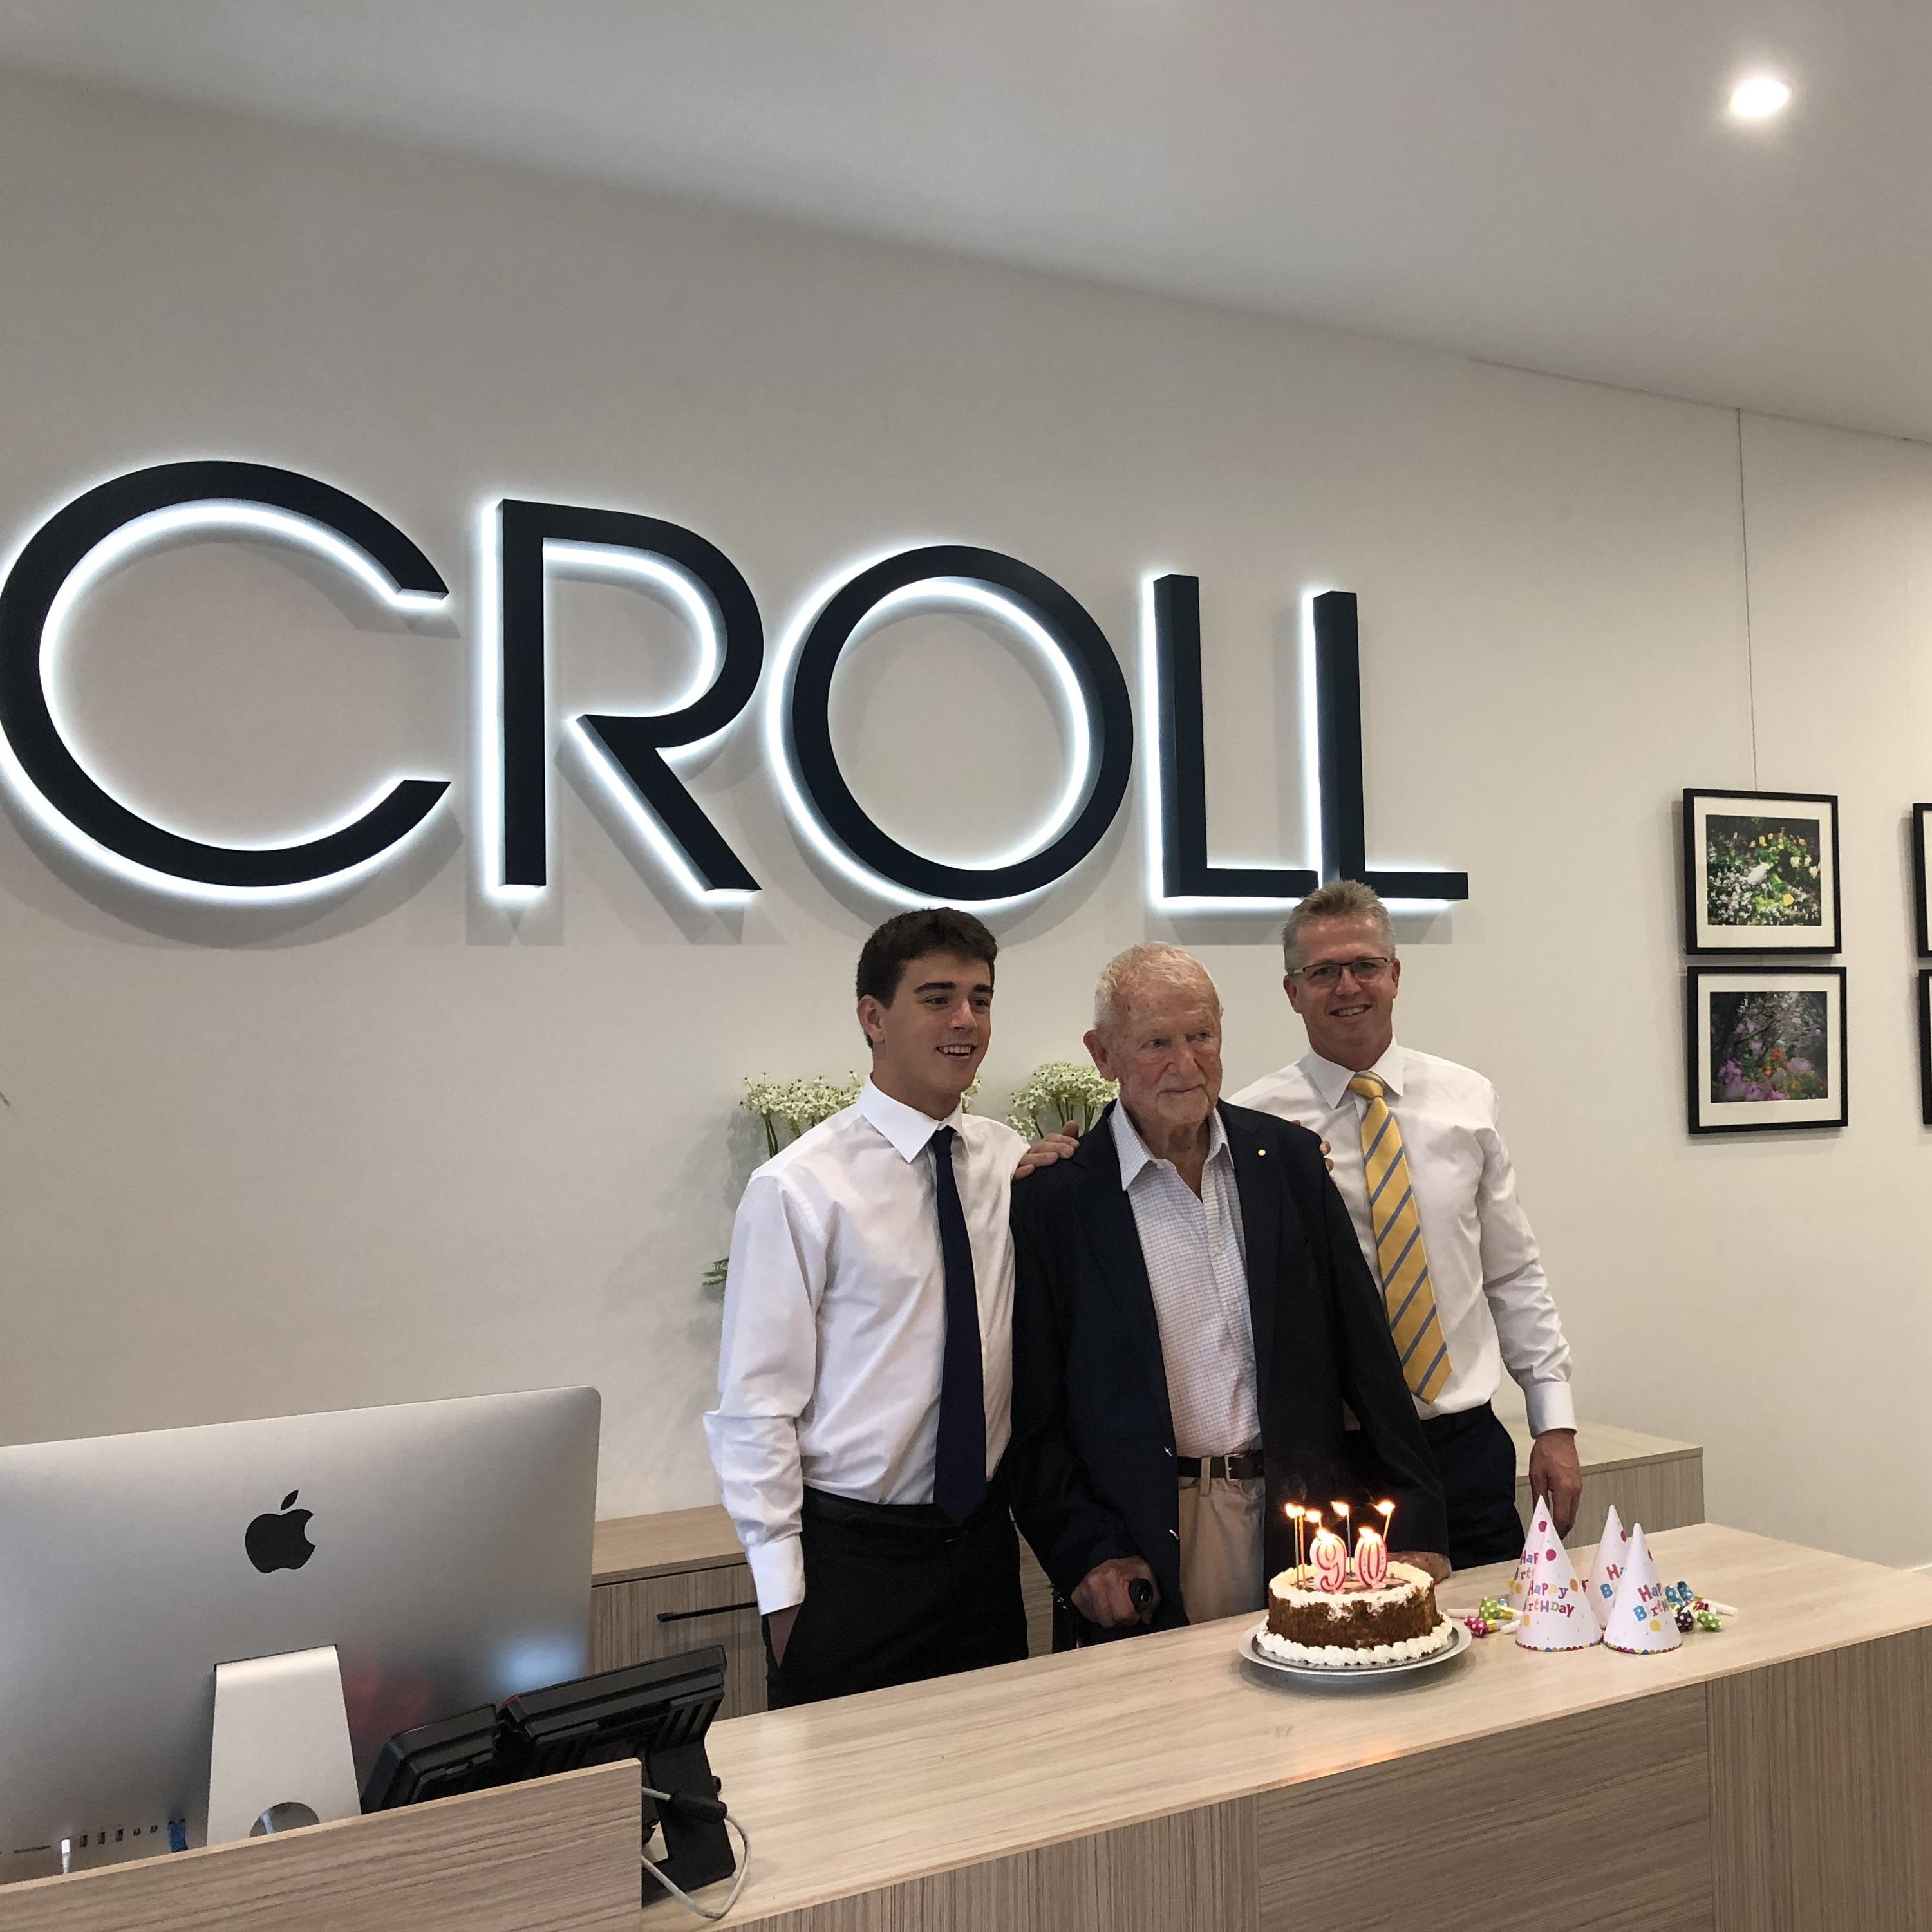 Chairman of the Board Turns 90 - 3 Croll Generations